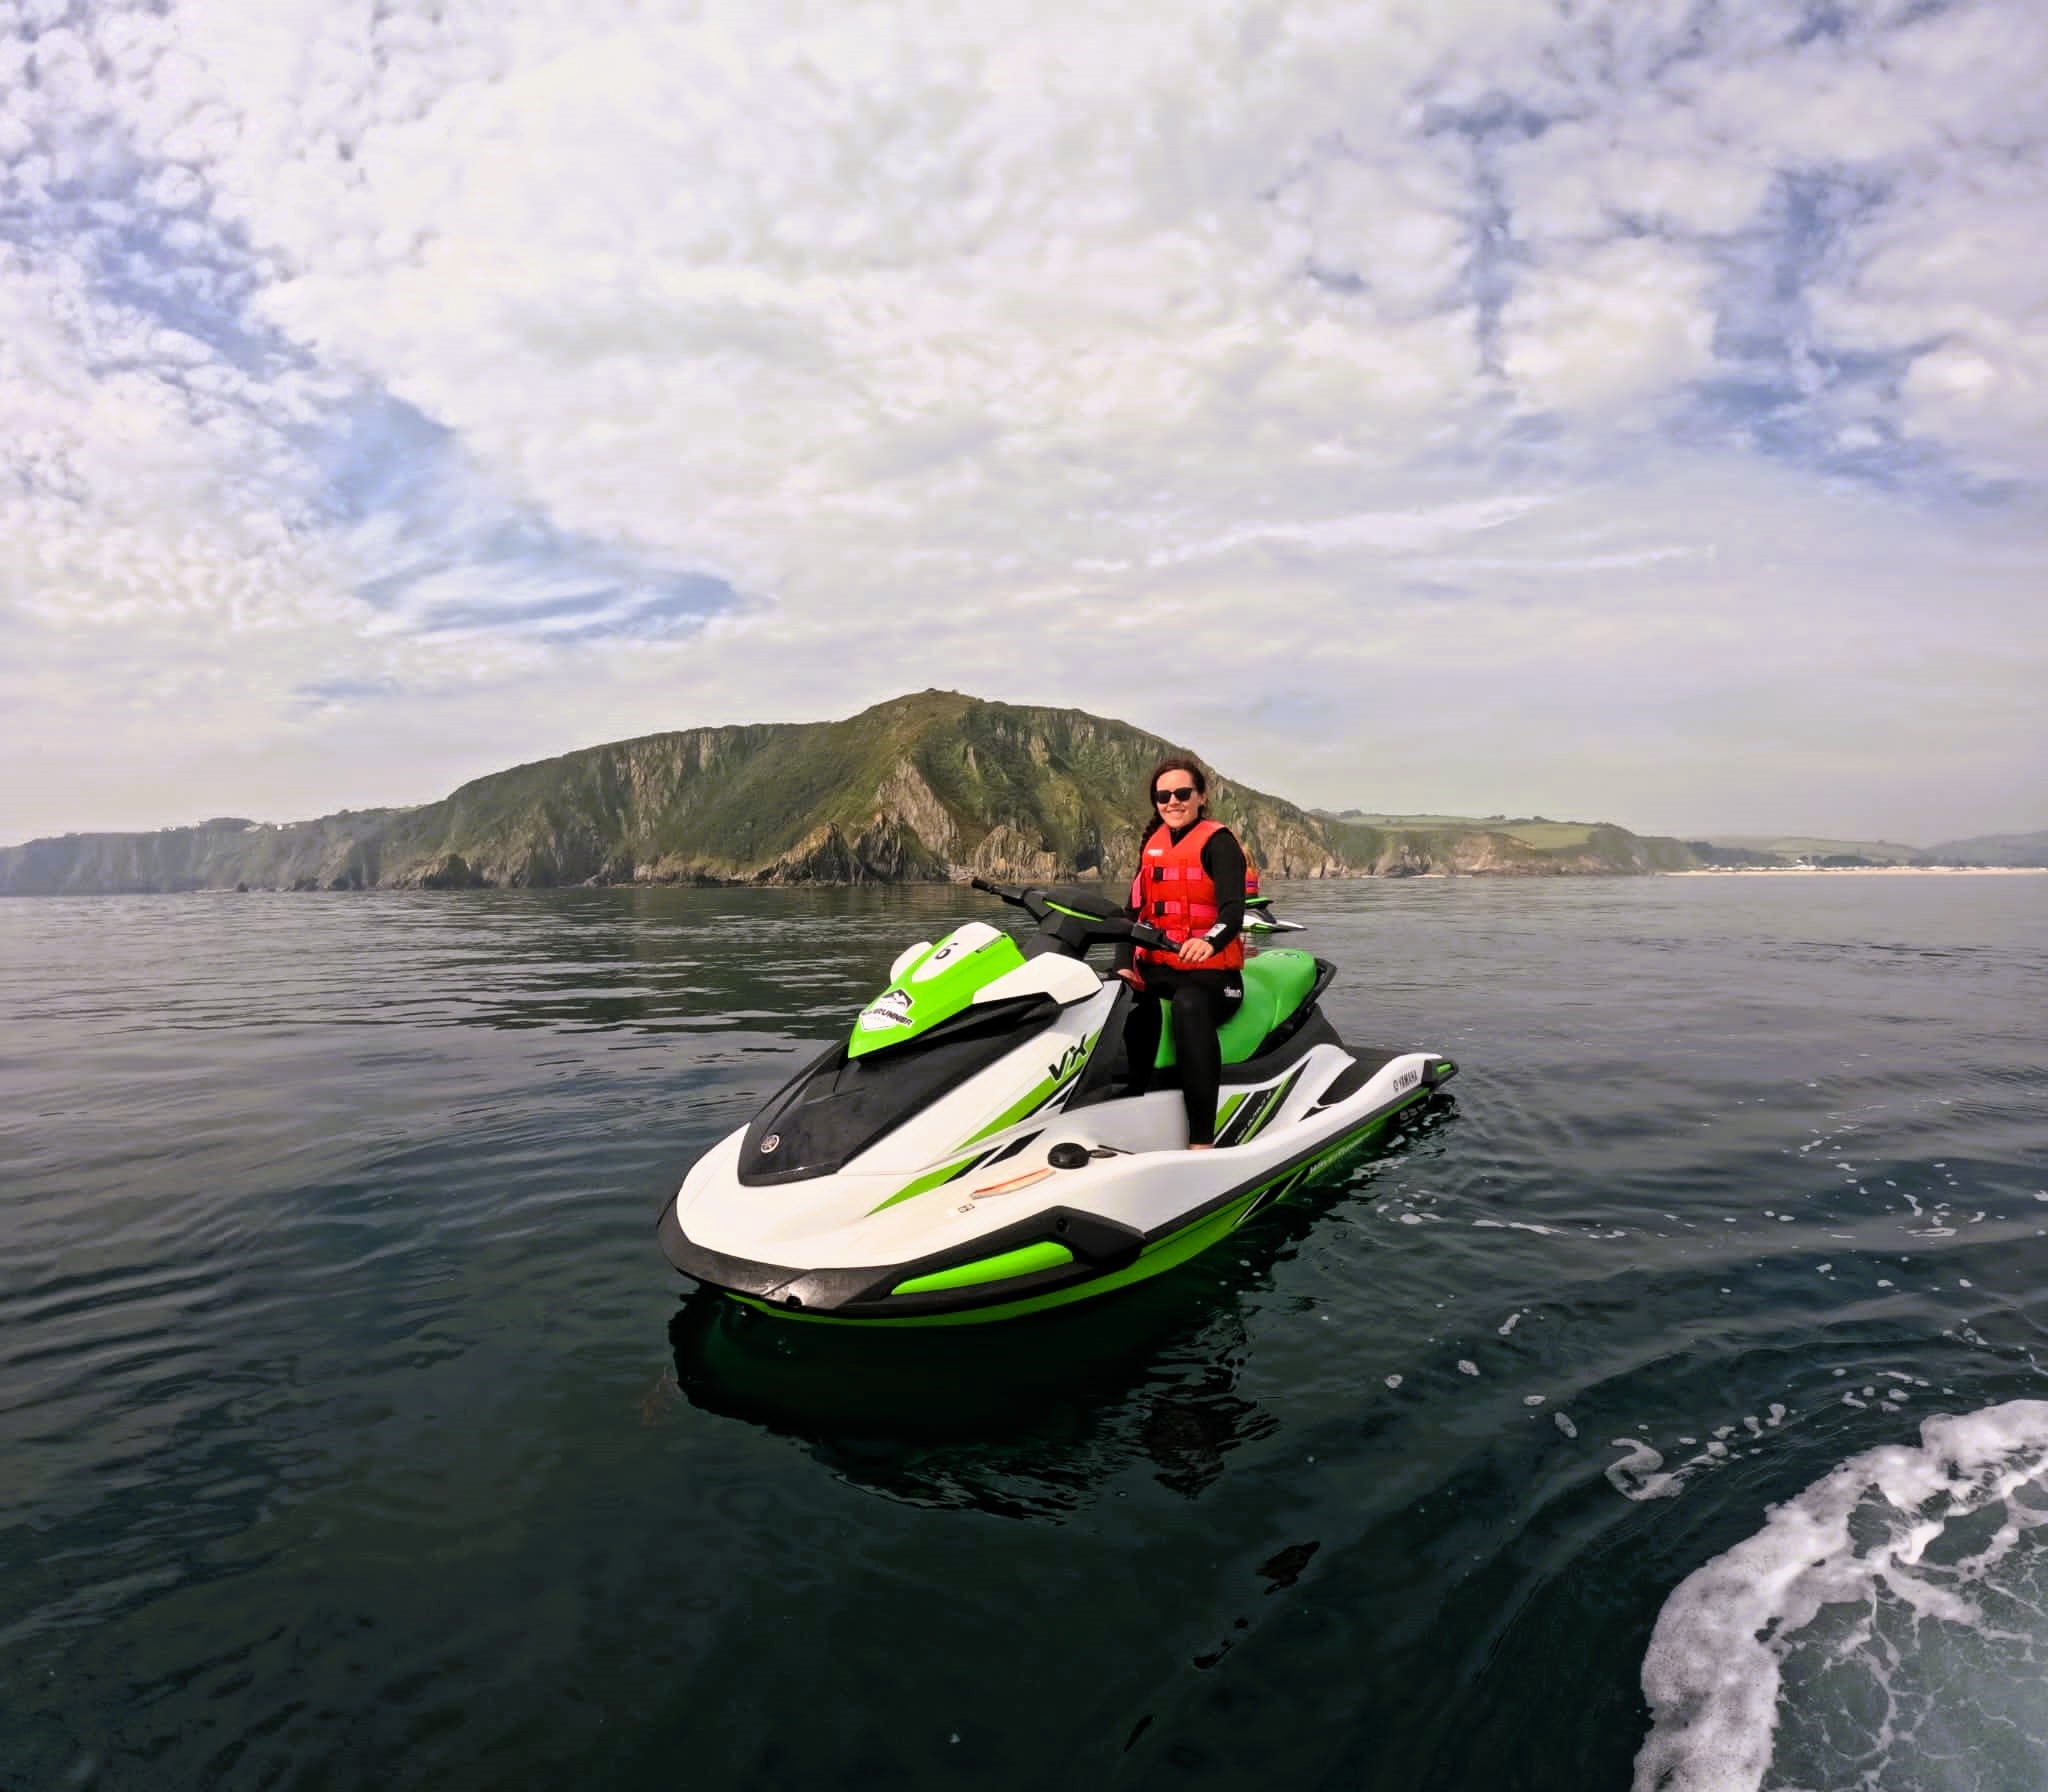 Wandering Lewis on a green and white jet-ski in Carlyon bay, Cornwall, England